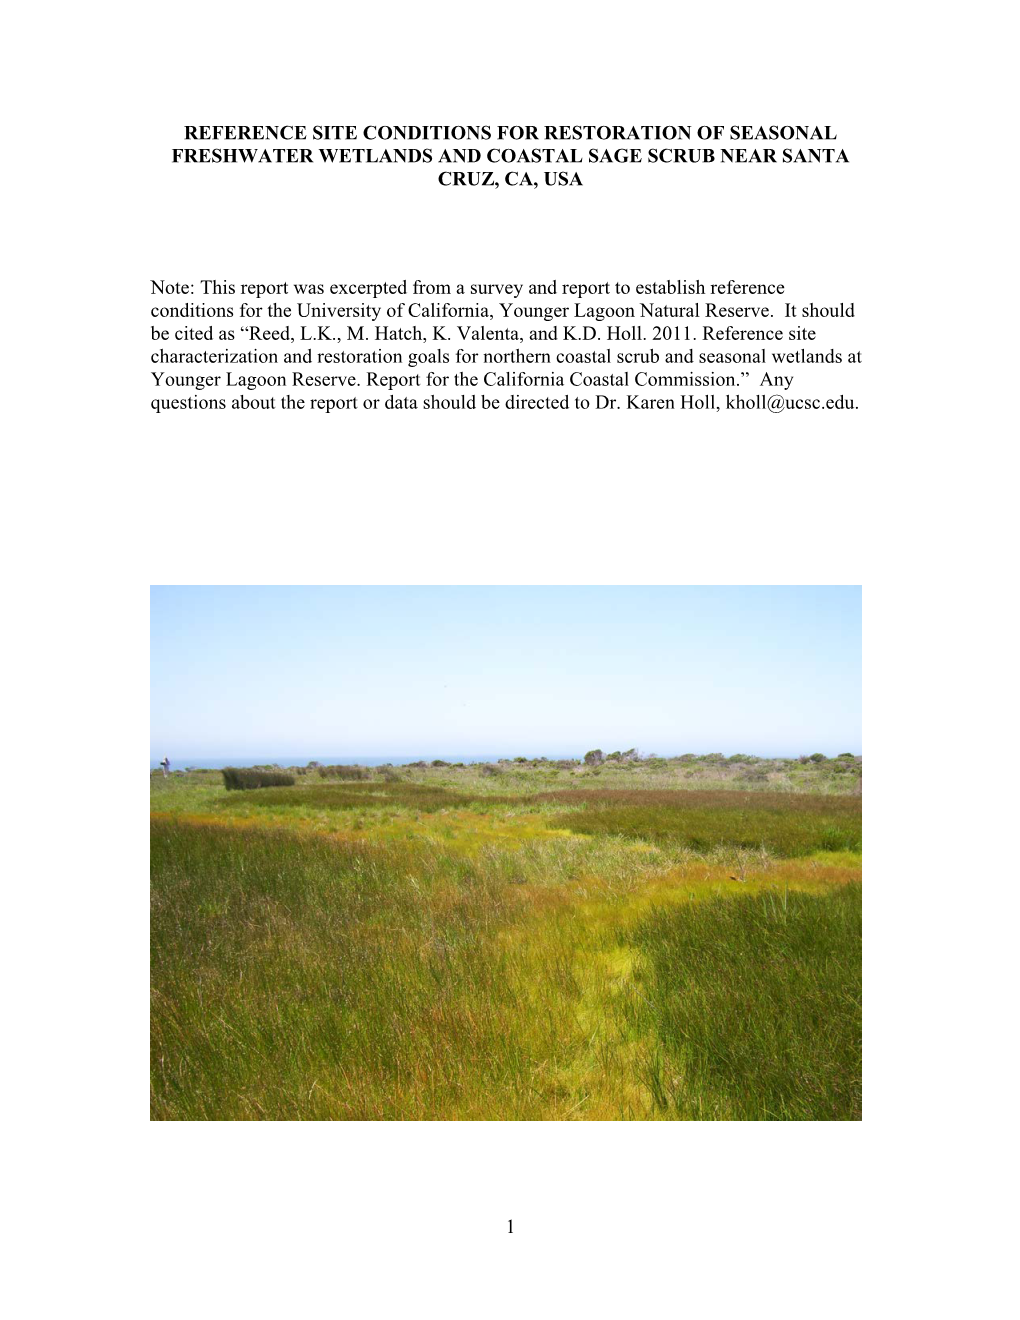 Reference Site Characterization and Restoration Goals for Northern Coastal Scrub and Seasonal Wetlands at Younger Lagoon Reserve